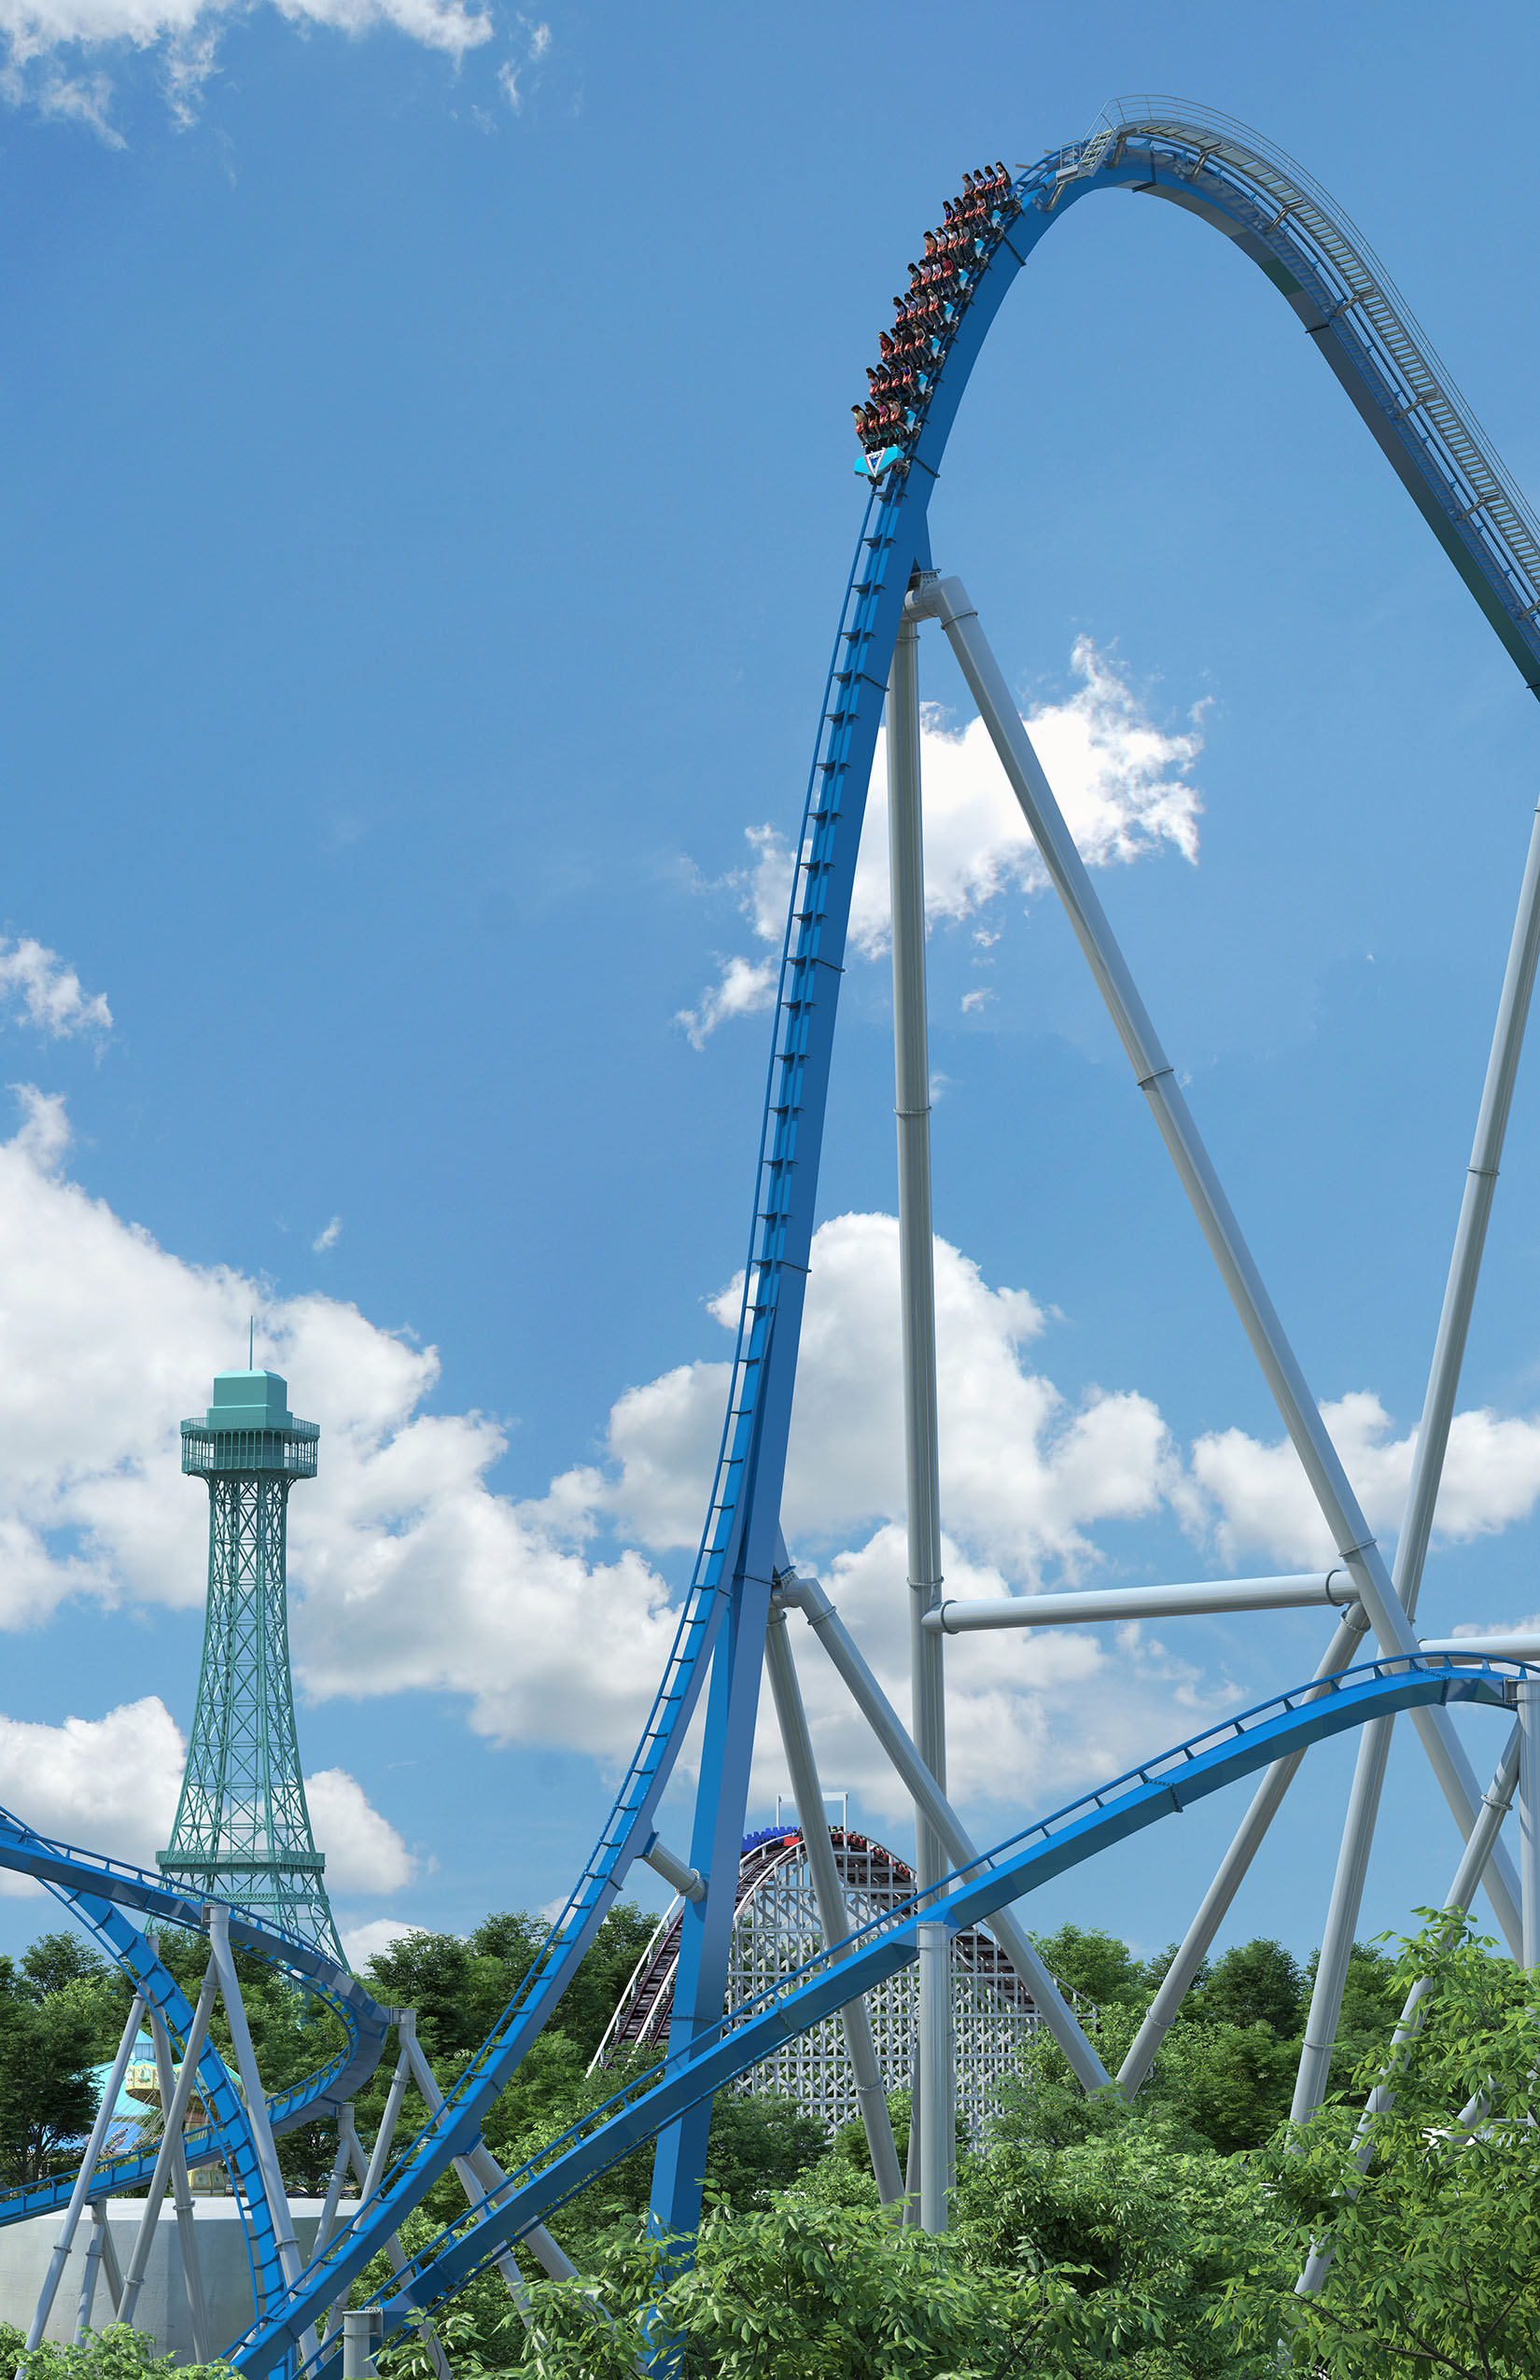 One of only seven giga coasters in the world to join Kings Island’s